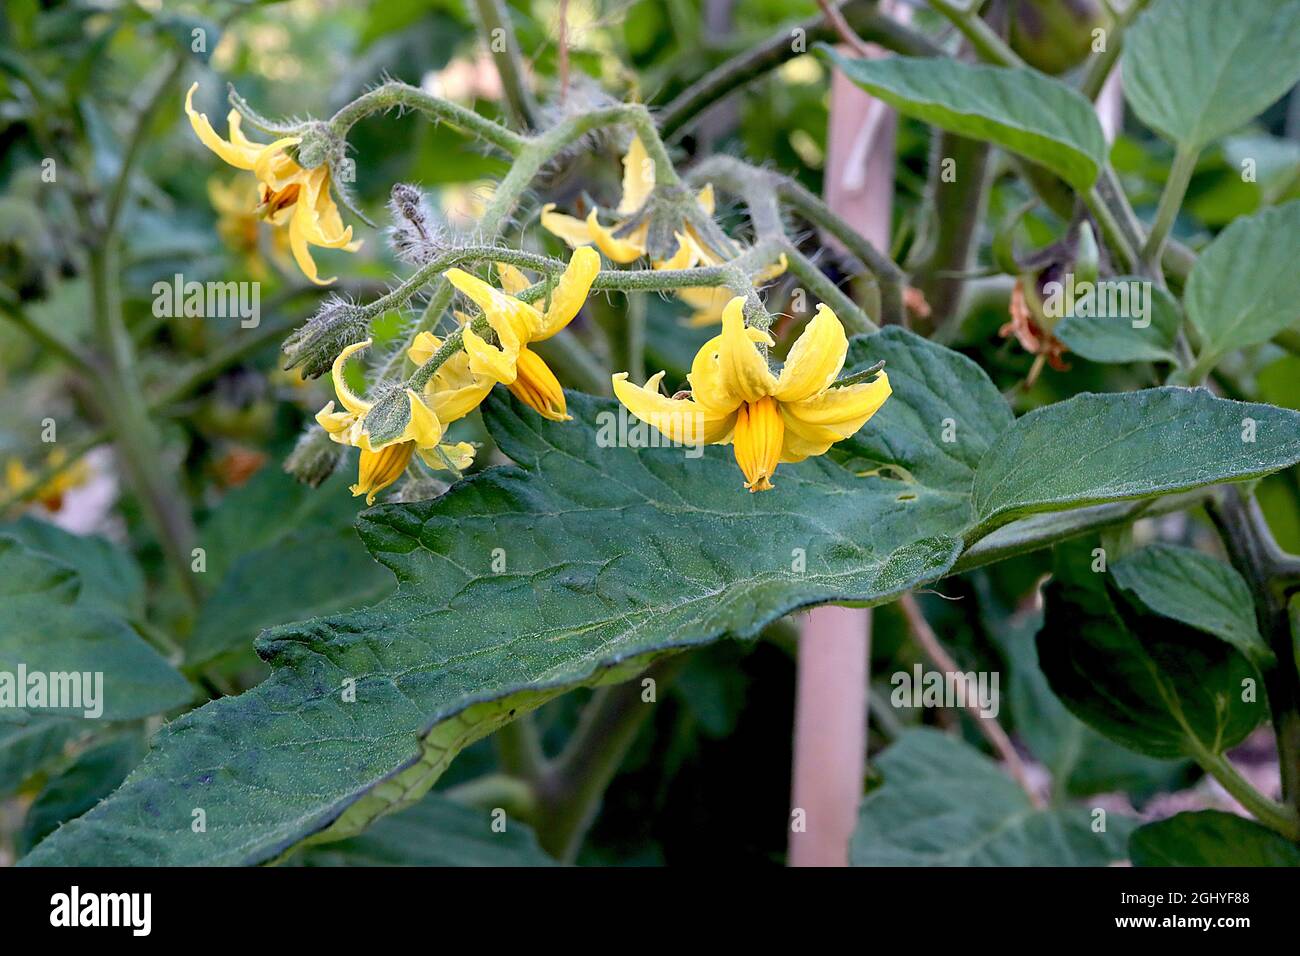 Solanum lycopersicum tomato plant - yellow flowers with fused yellow stamens and large ovate mid green leaves, August, England, UK Stock Photo